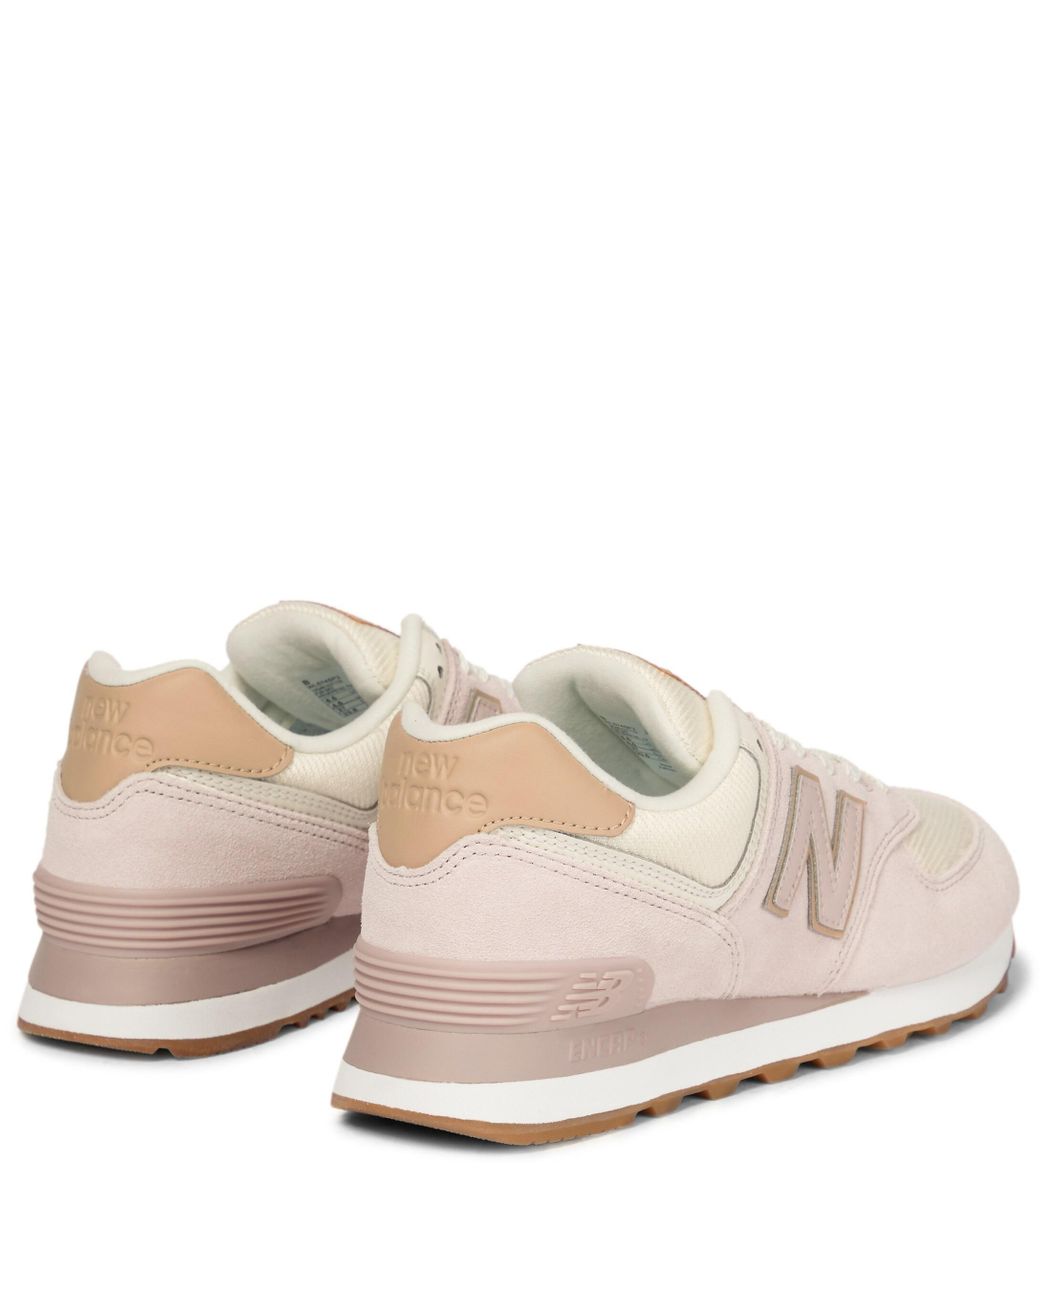 New Balance Leather X Reformation 574 Suede-trimmed Sneakers in Pink | Lyst